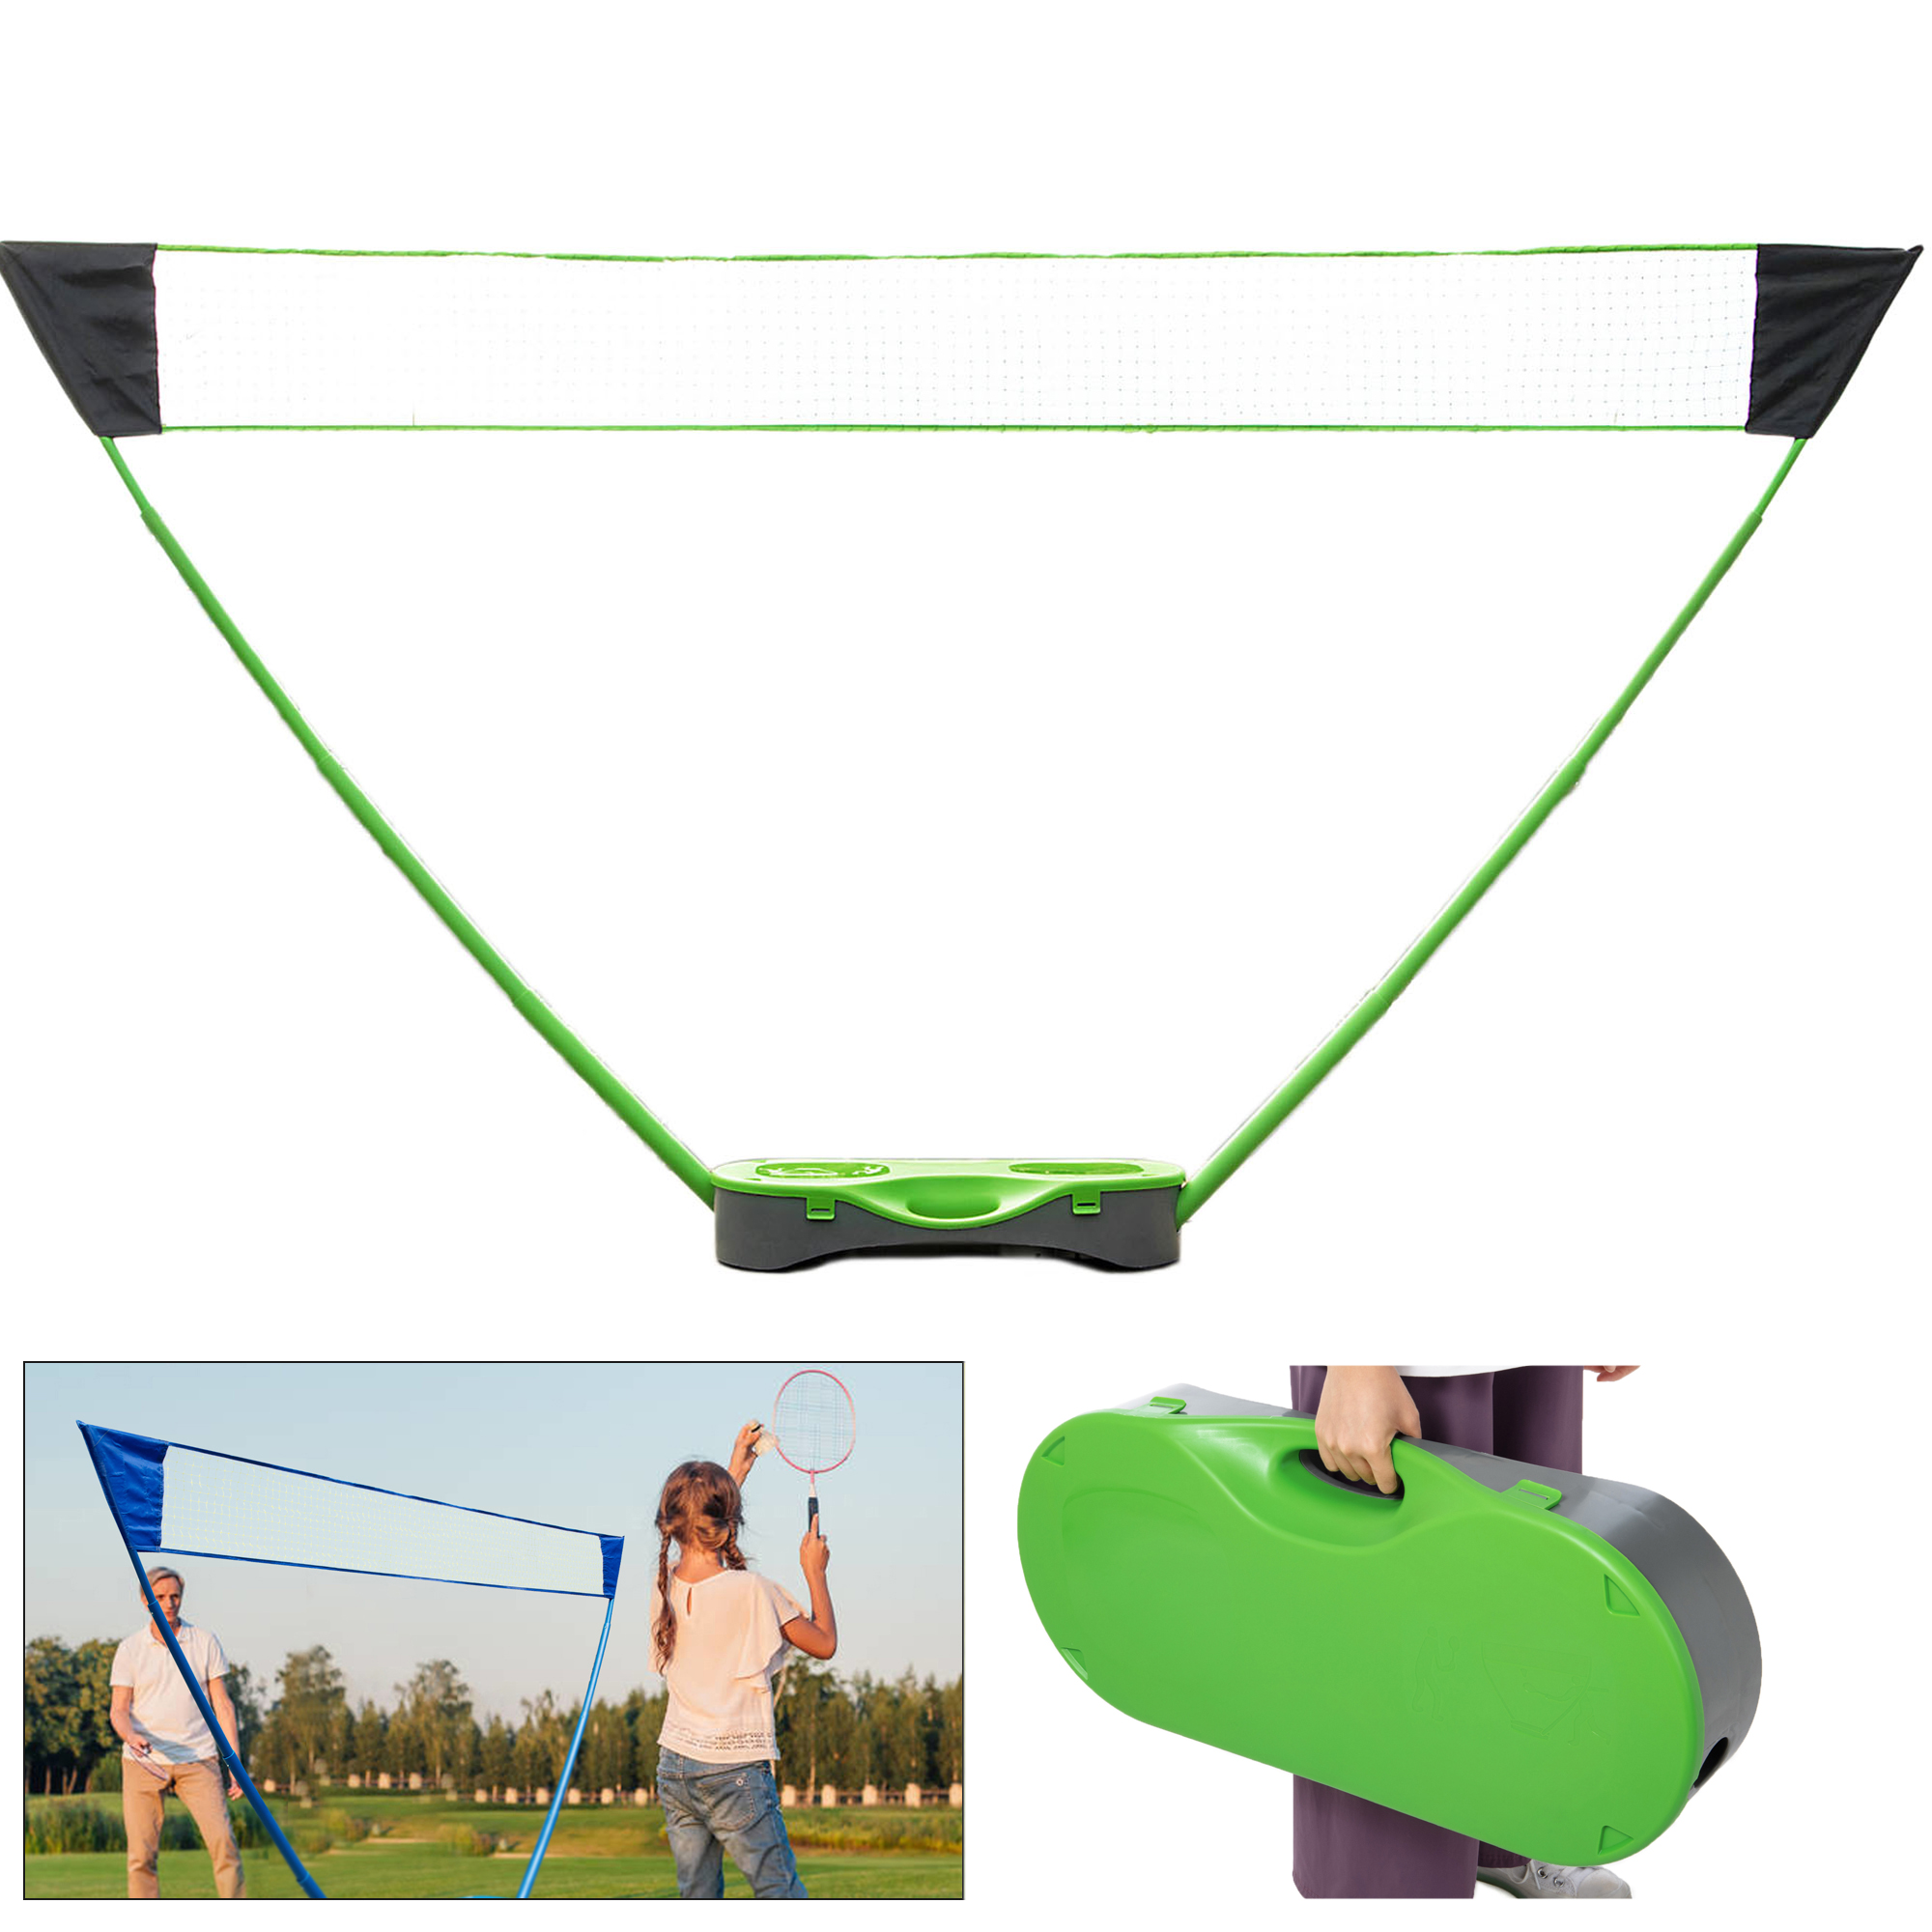 SAYFUT Badminton Set, Portable Volleyball Kit Recreation Game Equipment with Freestanding Base and Carry Bag, for Youth Adult, for Beach, Garden, Park or Backyard - image 1 of 7